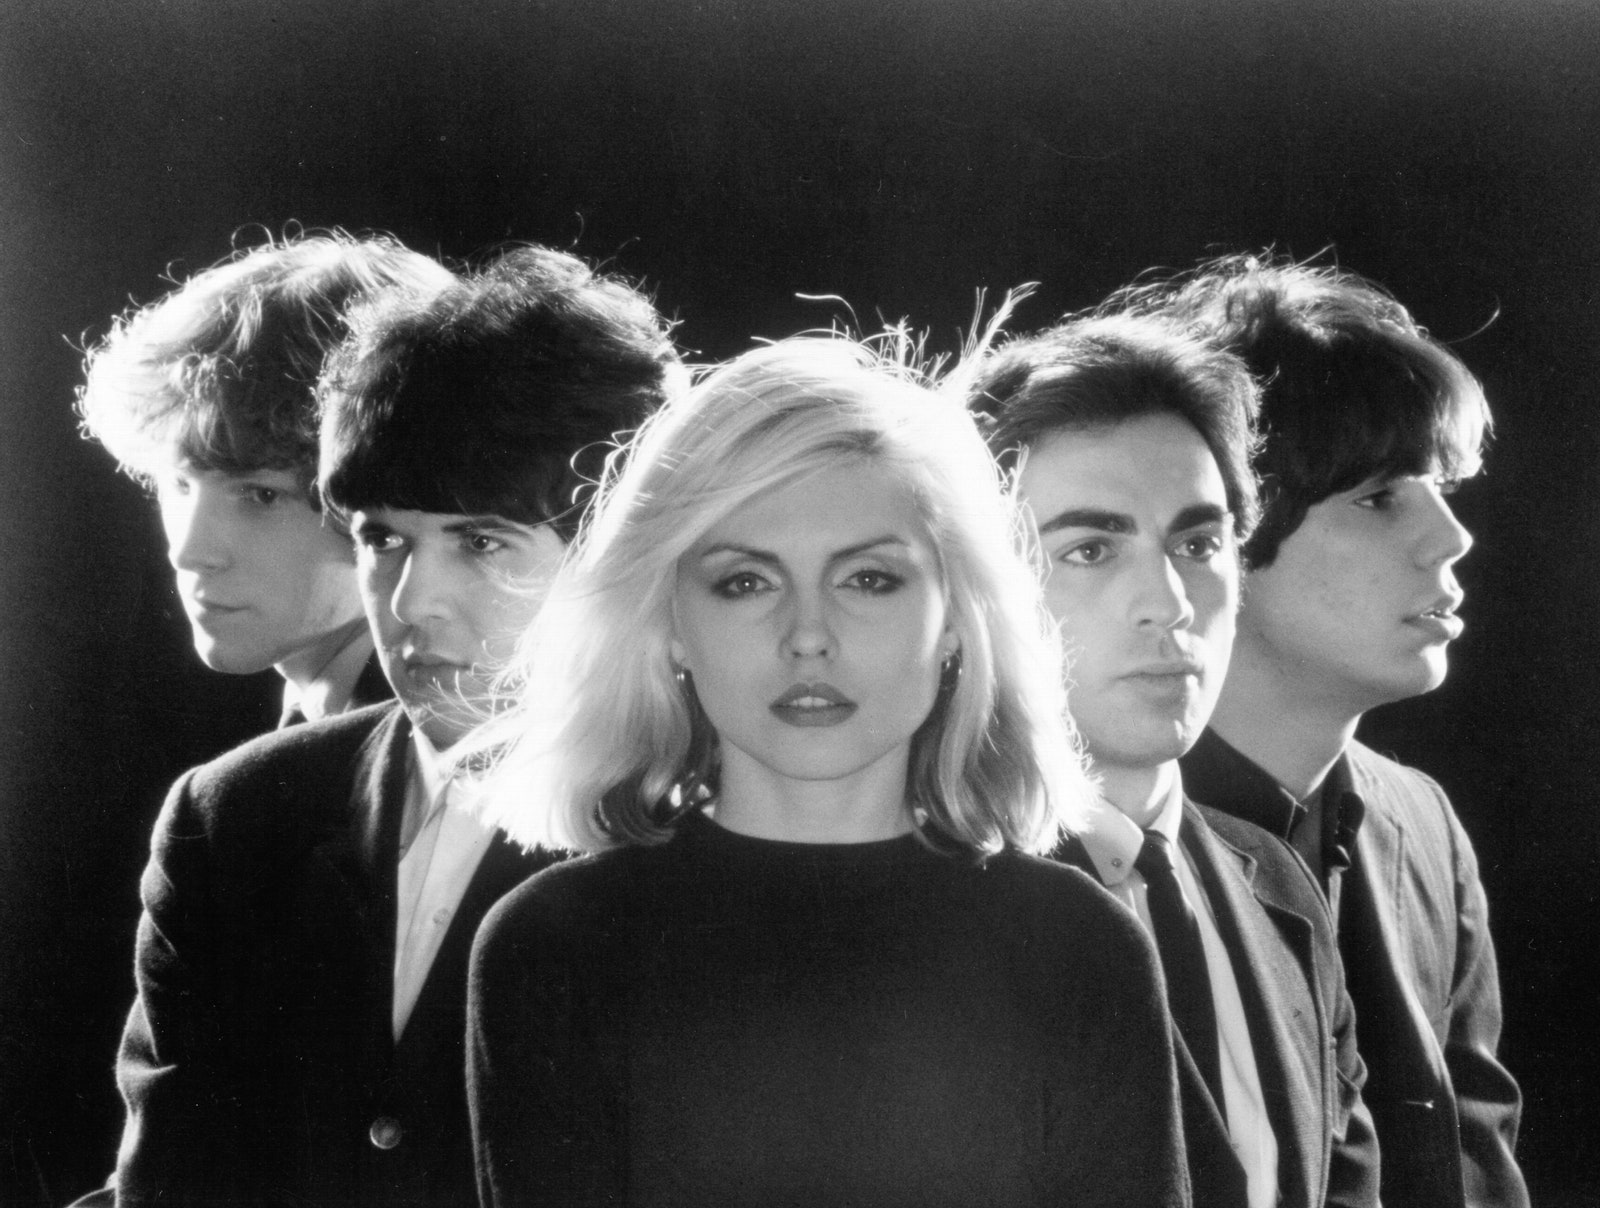 Image may contain Debbie Harry Human Person Clothing Apparel Face Crowd Suit Coat and Overcoat Debbie Harry Blondie cat...